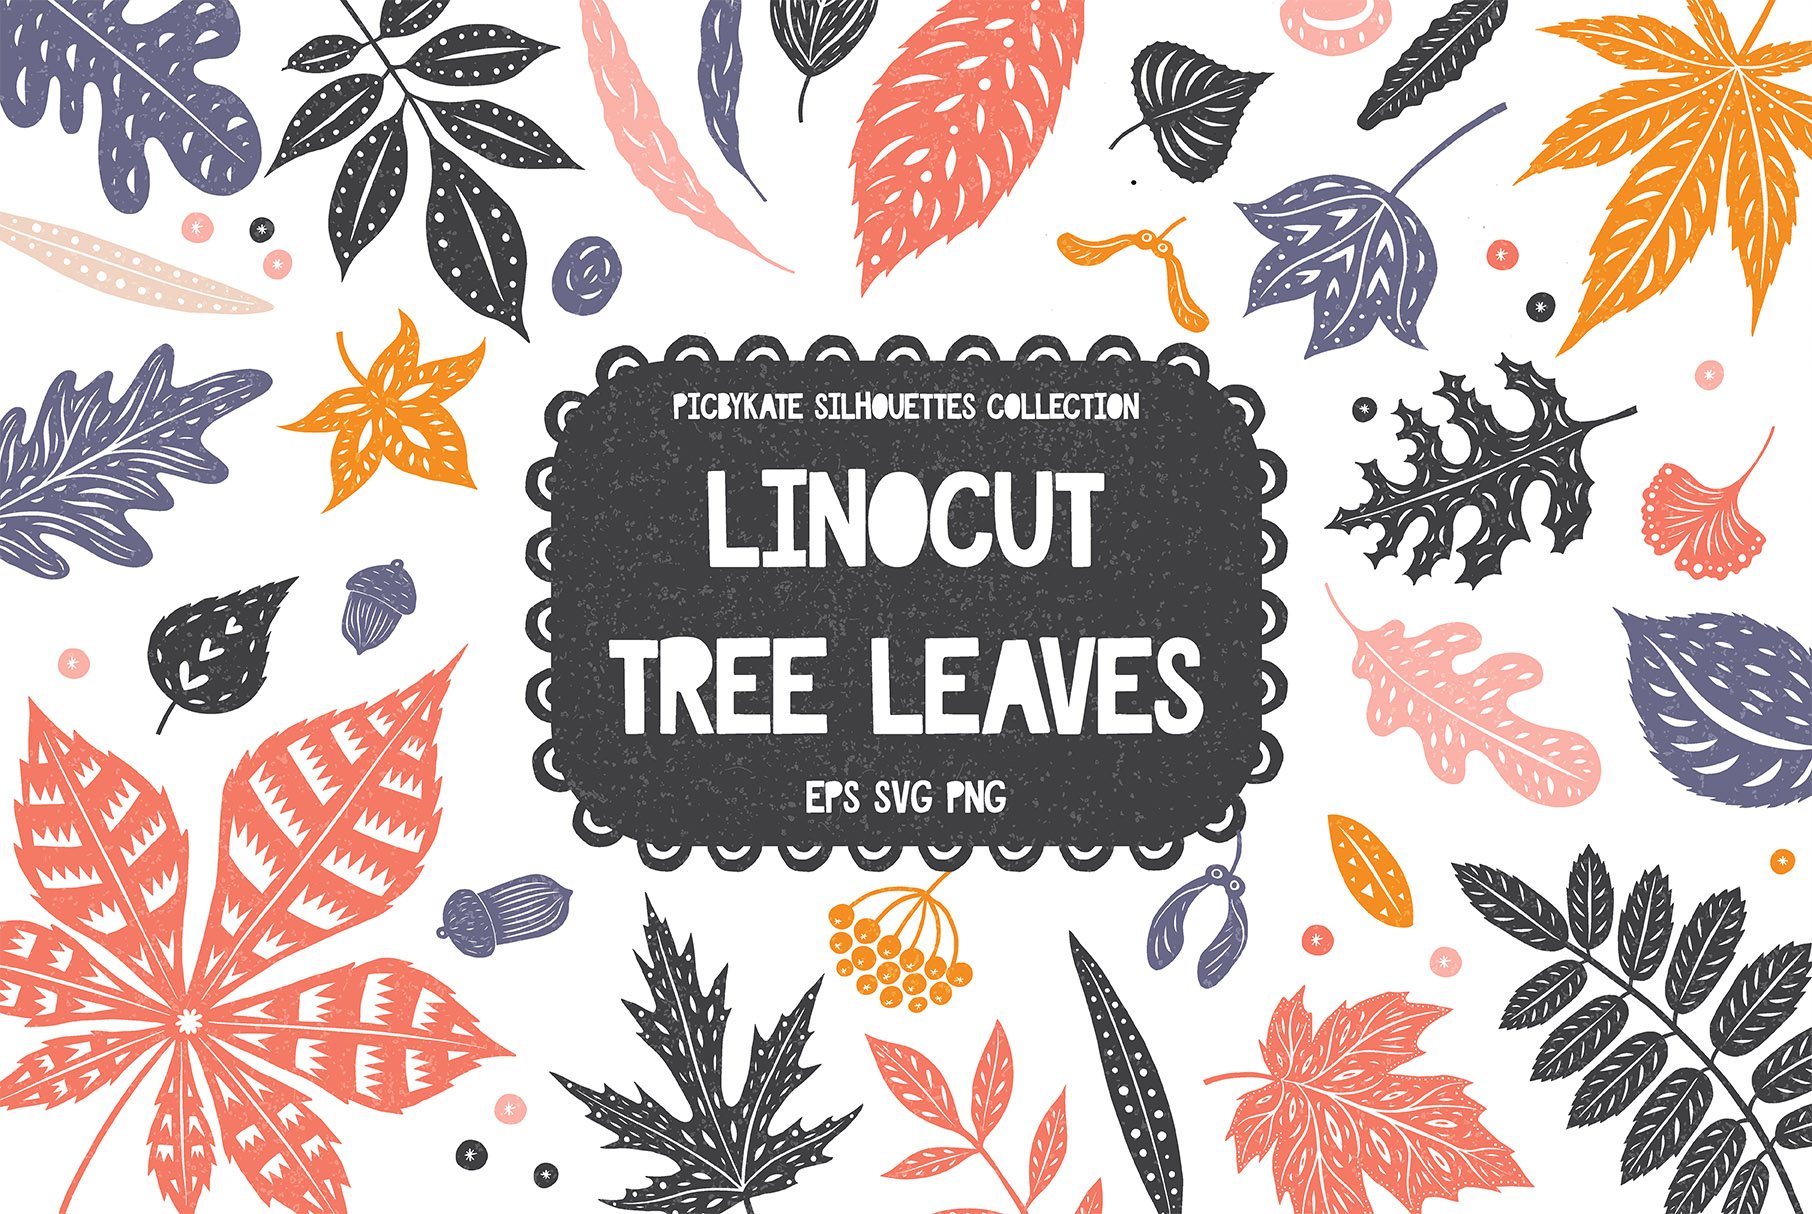 Linocut Tree Leaves Silhouettes Collection